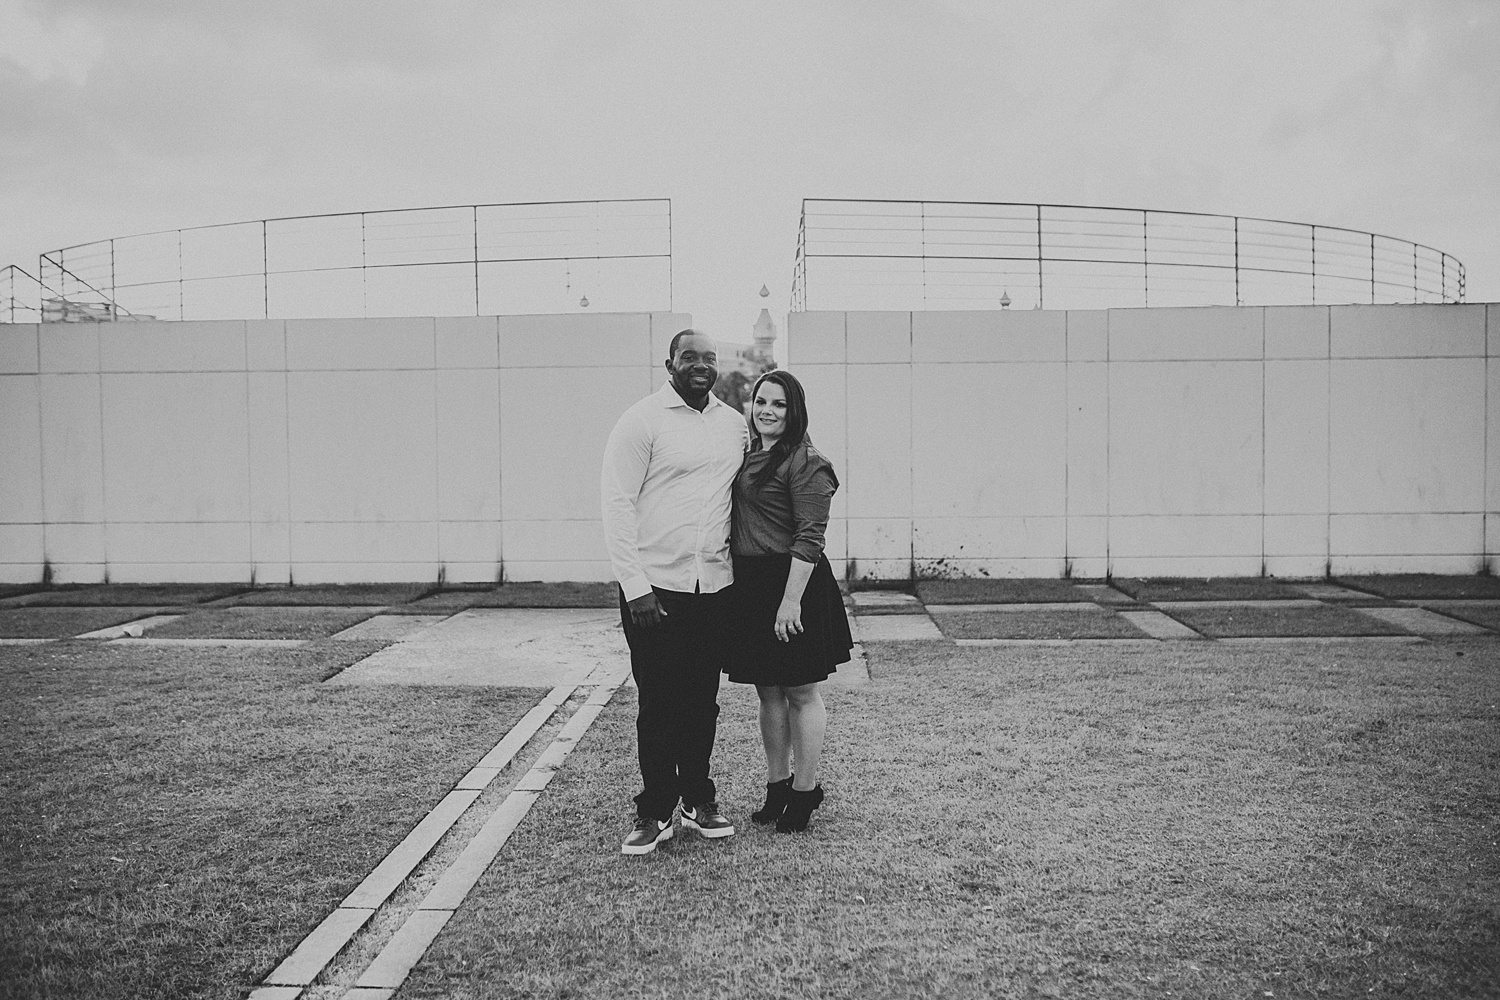 Downtown Tampa Engagement Photos, Downtown Tampa Engagement Photo Ideas, Tampa Wedding Photographers, Ashley Izquierdo, Tampa Engagement Session Ideas, Tampa Engagement Ideas